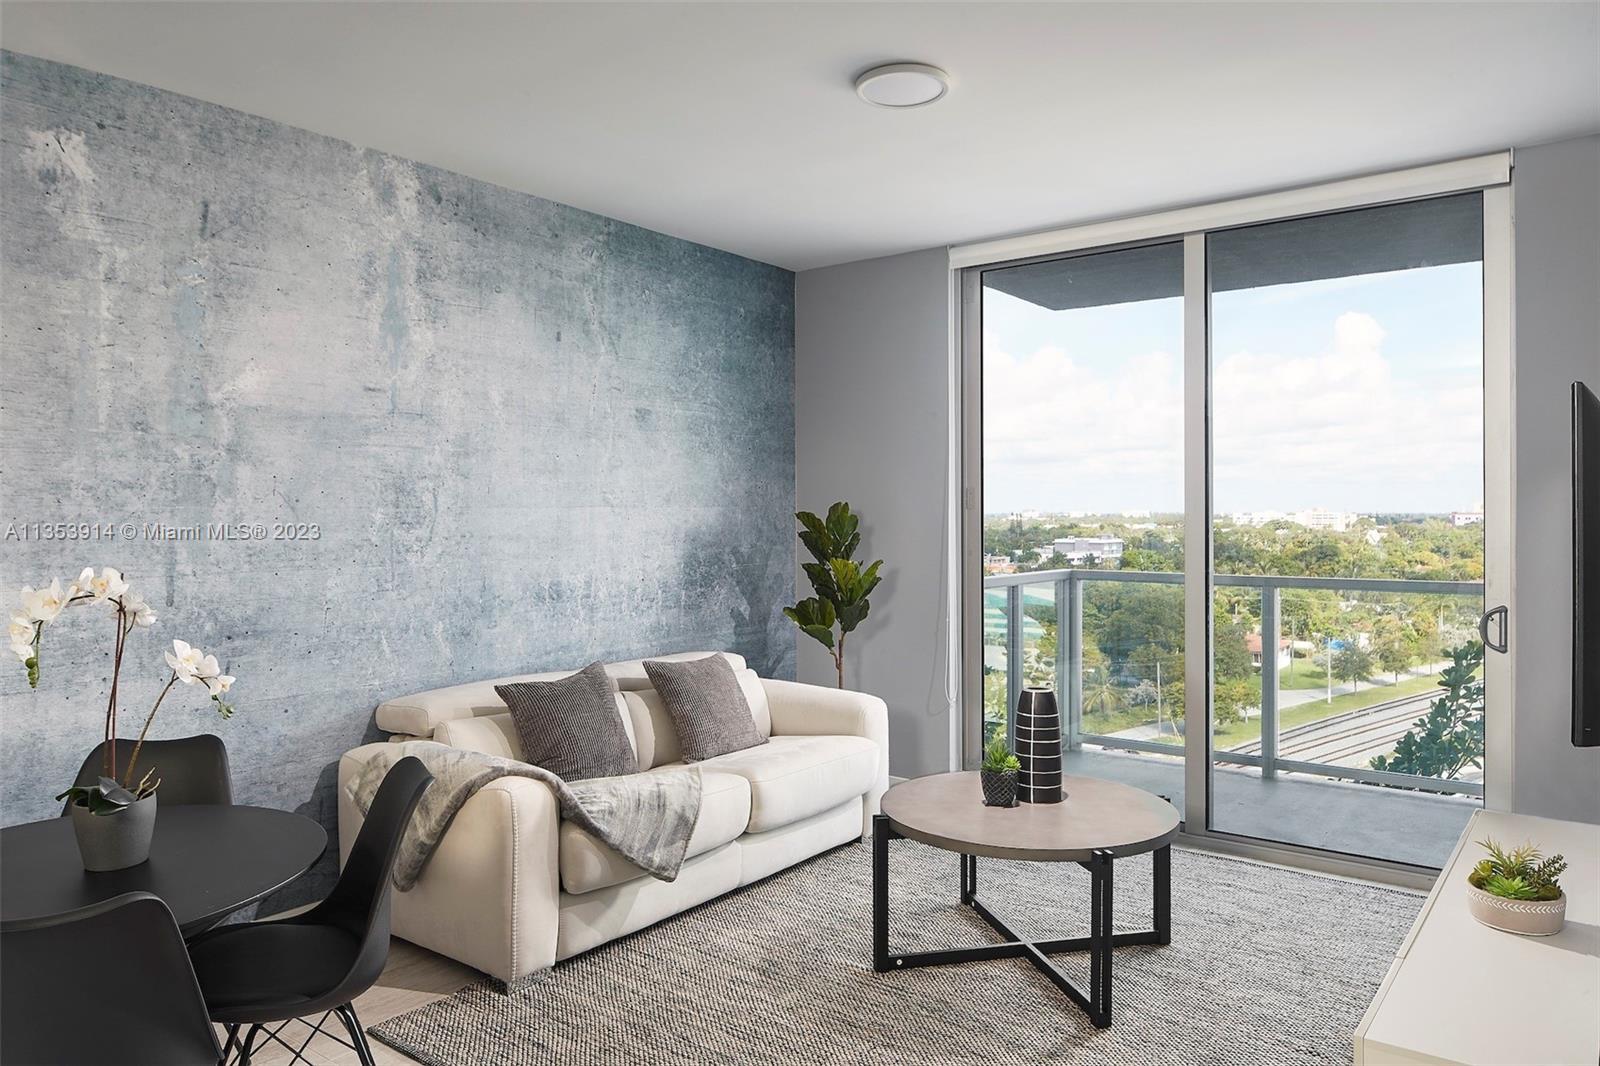 AMAZING OPPORTUNITY BEAUTIFUL 1-BED CONDO IN ONE OF THE NEWEST CONDO BUILDINGS IN THE MIAMI DESIGN D